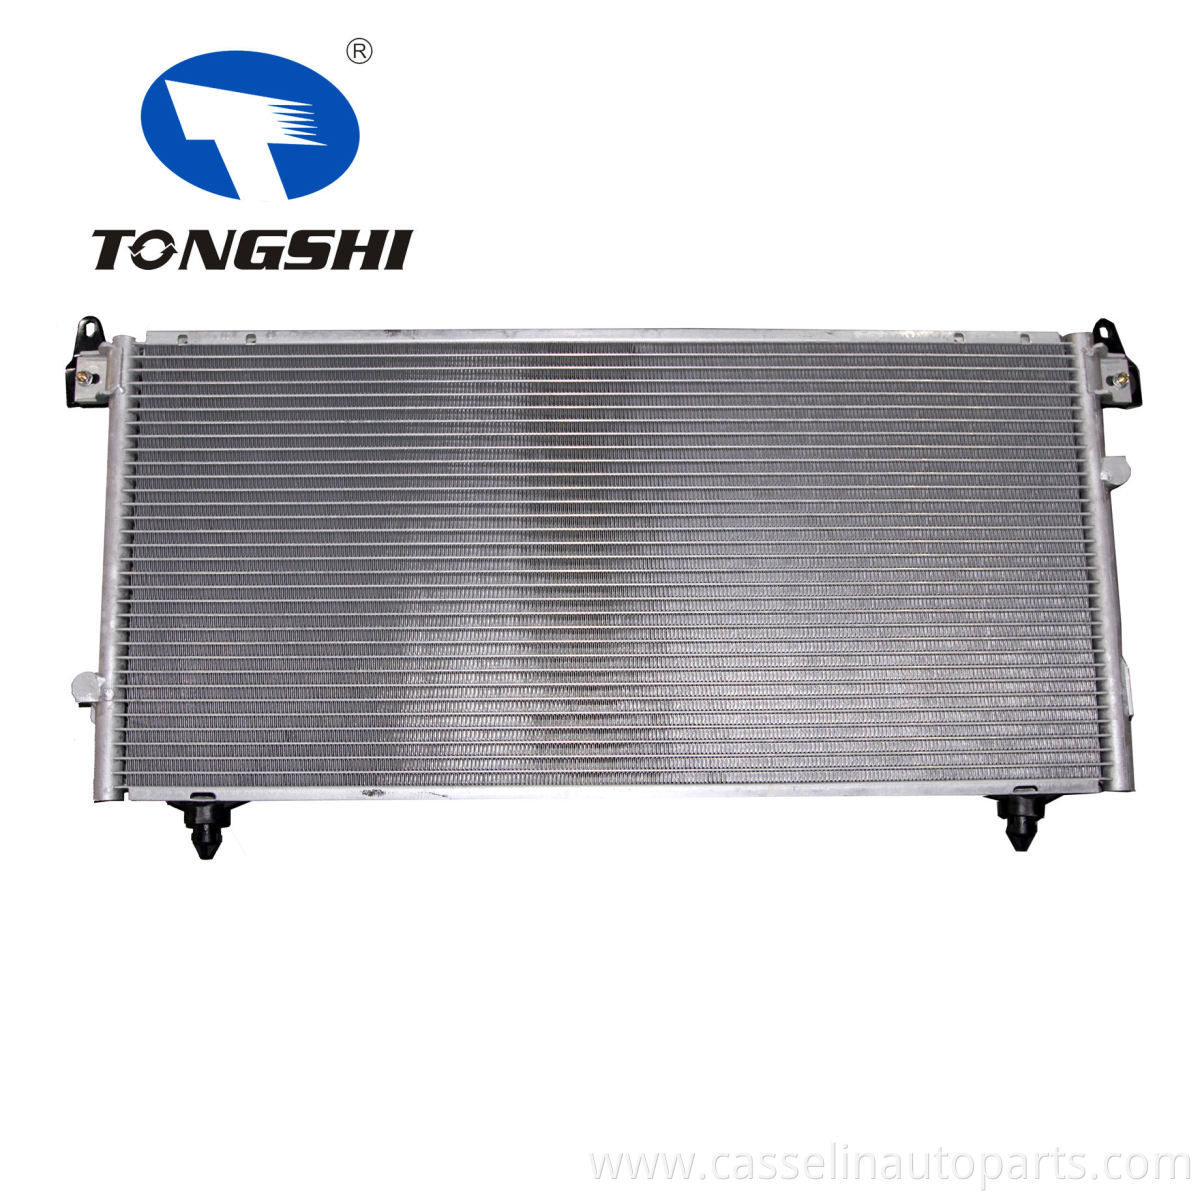 Air Conditioning Condensers for TOYOTA TUNDRA 00-06 OEM 88460-0050 Car Condenser